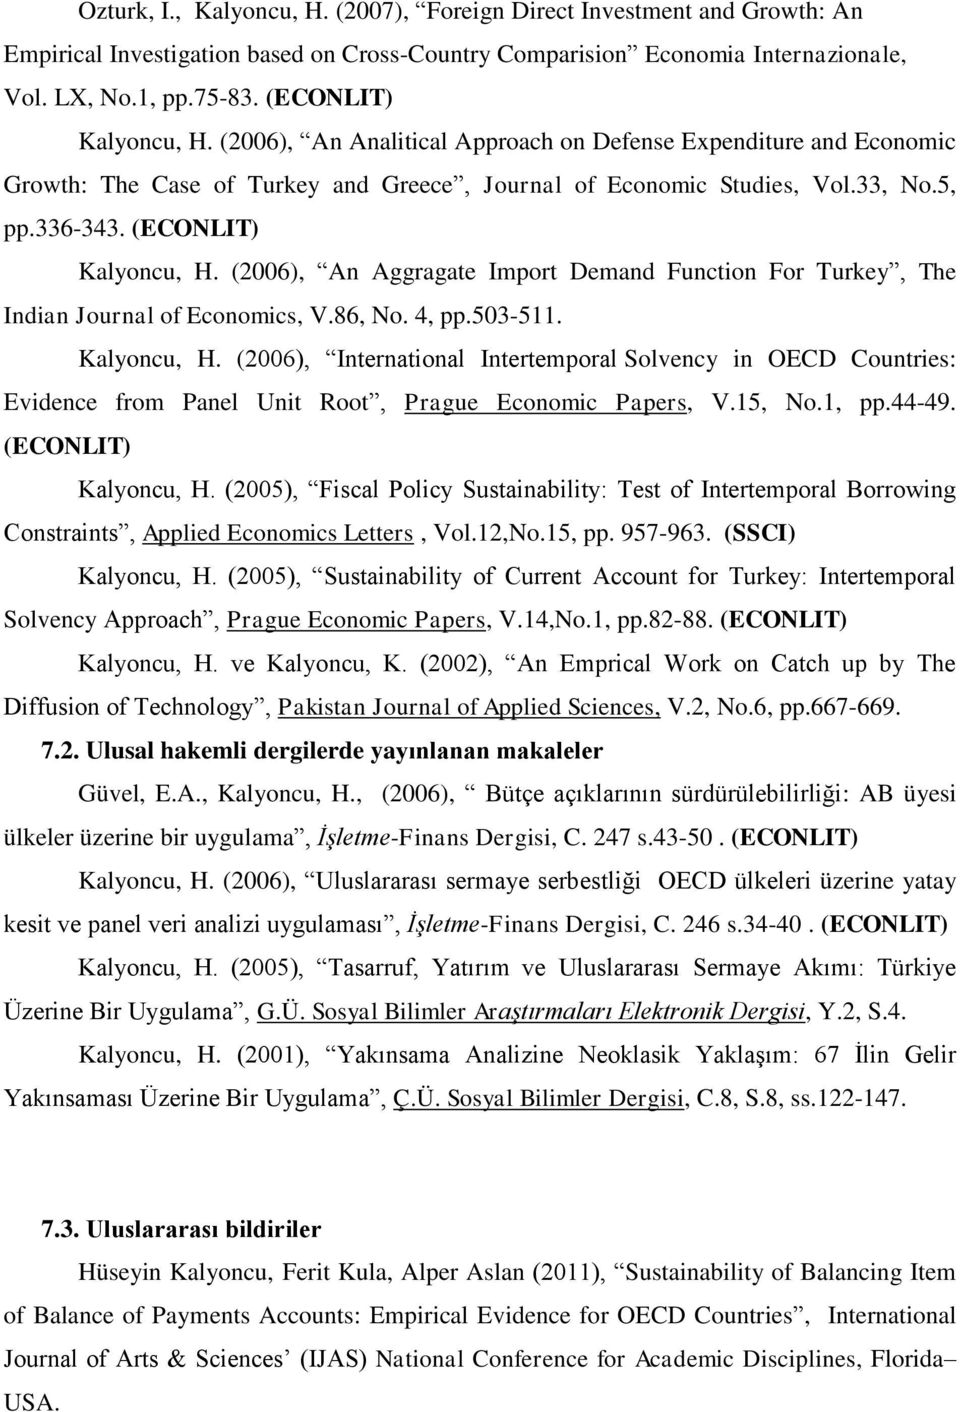 (ECONLIT) Kalyoncu, H. (2006), An Aggragate Import Demand Function For Turkey, The Indian Journal of Economics, V.86, No. 4, pp.503-511. Kalyoncu, H. (2006), International Intertemporal Solvency in OECD Countries: Evidence from Panel Unit Root, Prague Economic Papers, V.